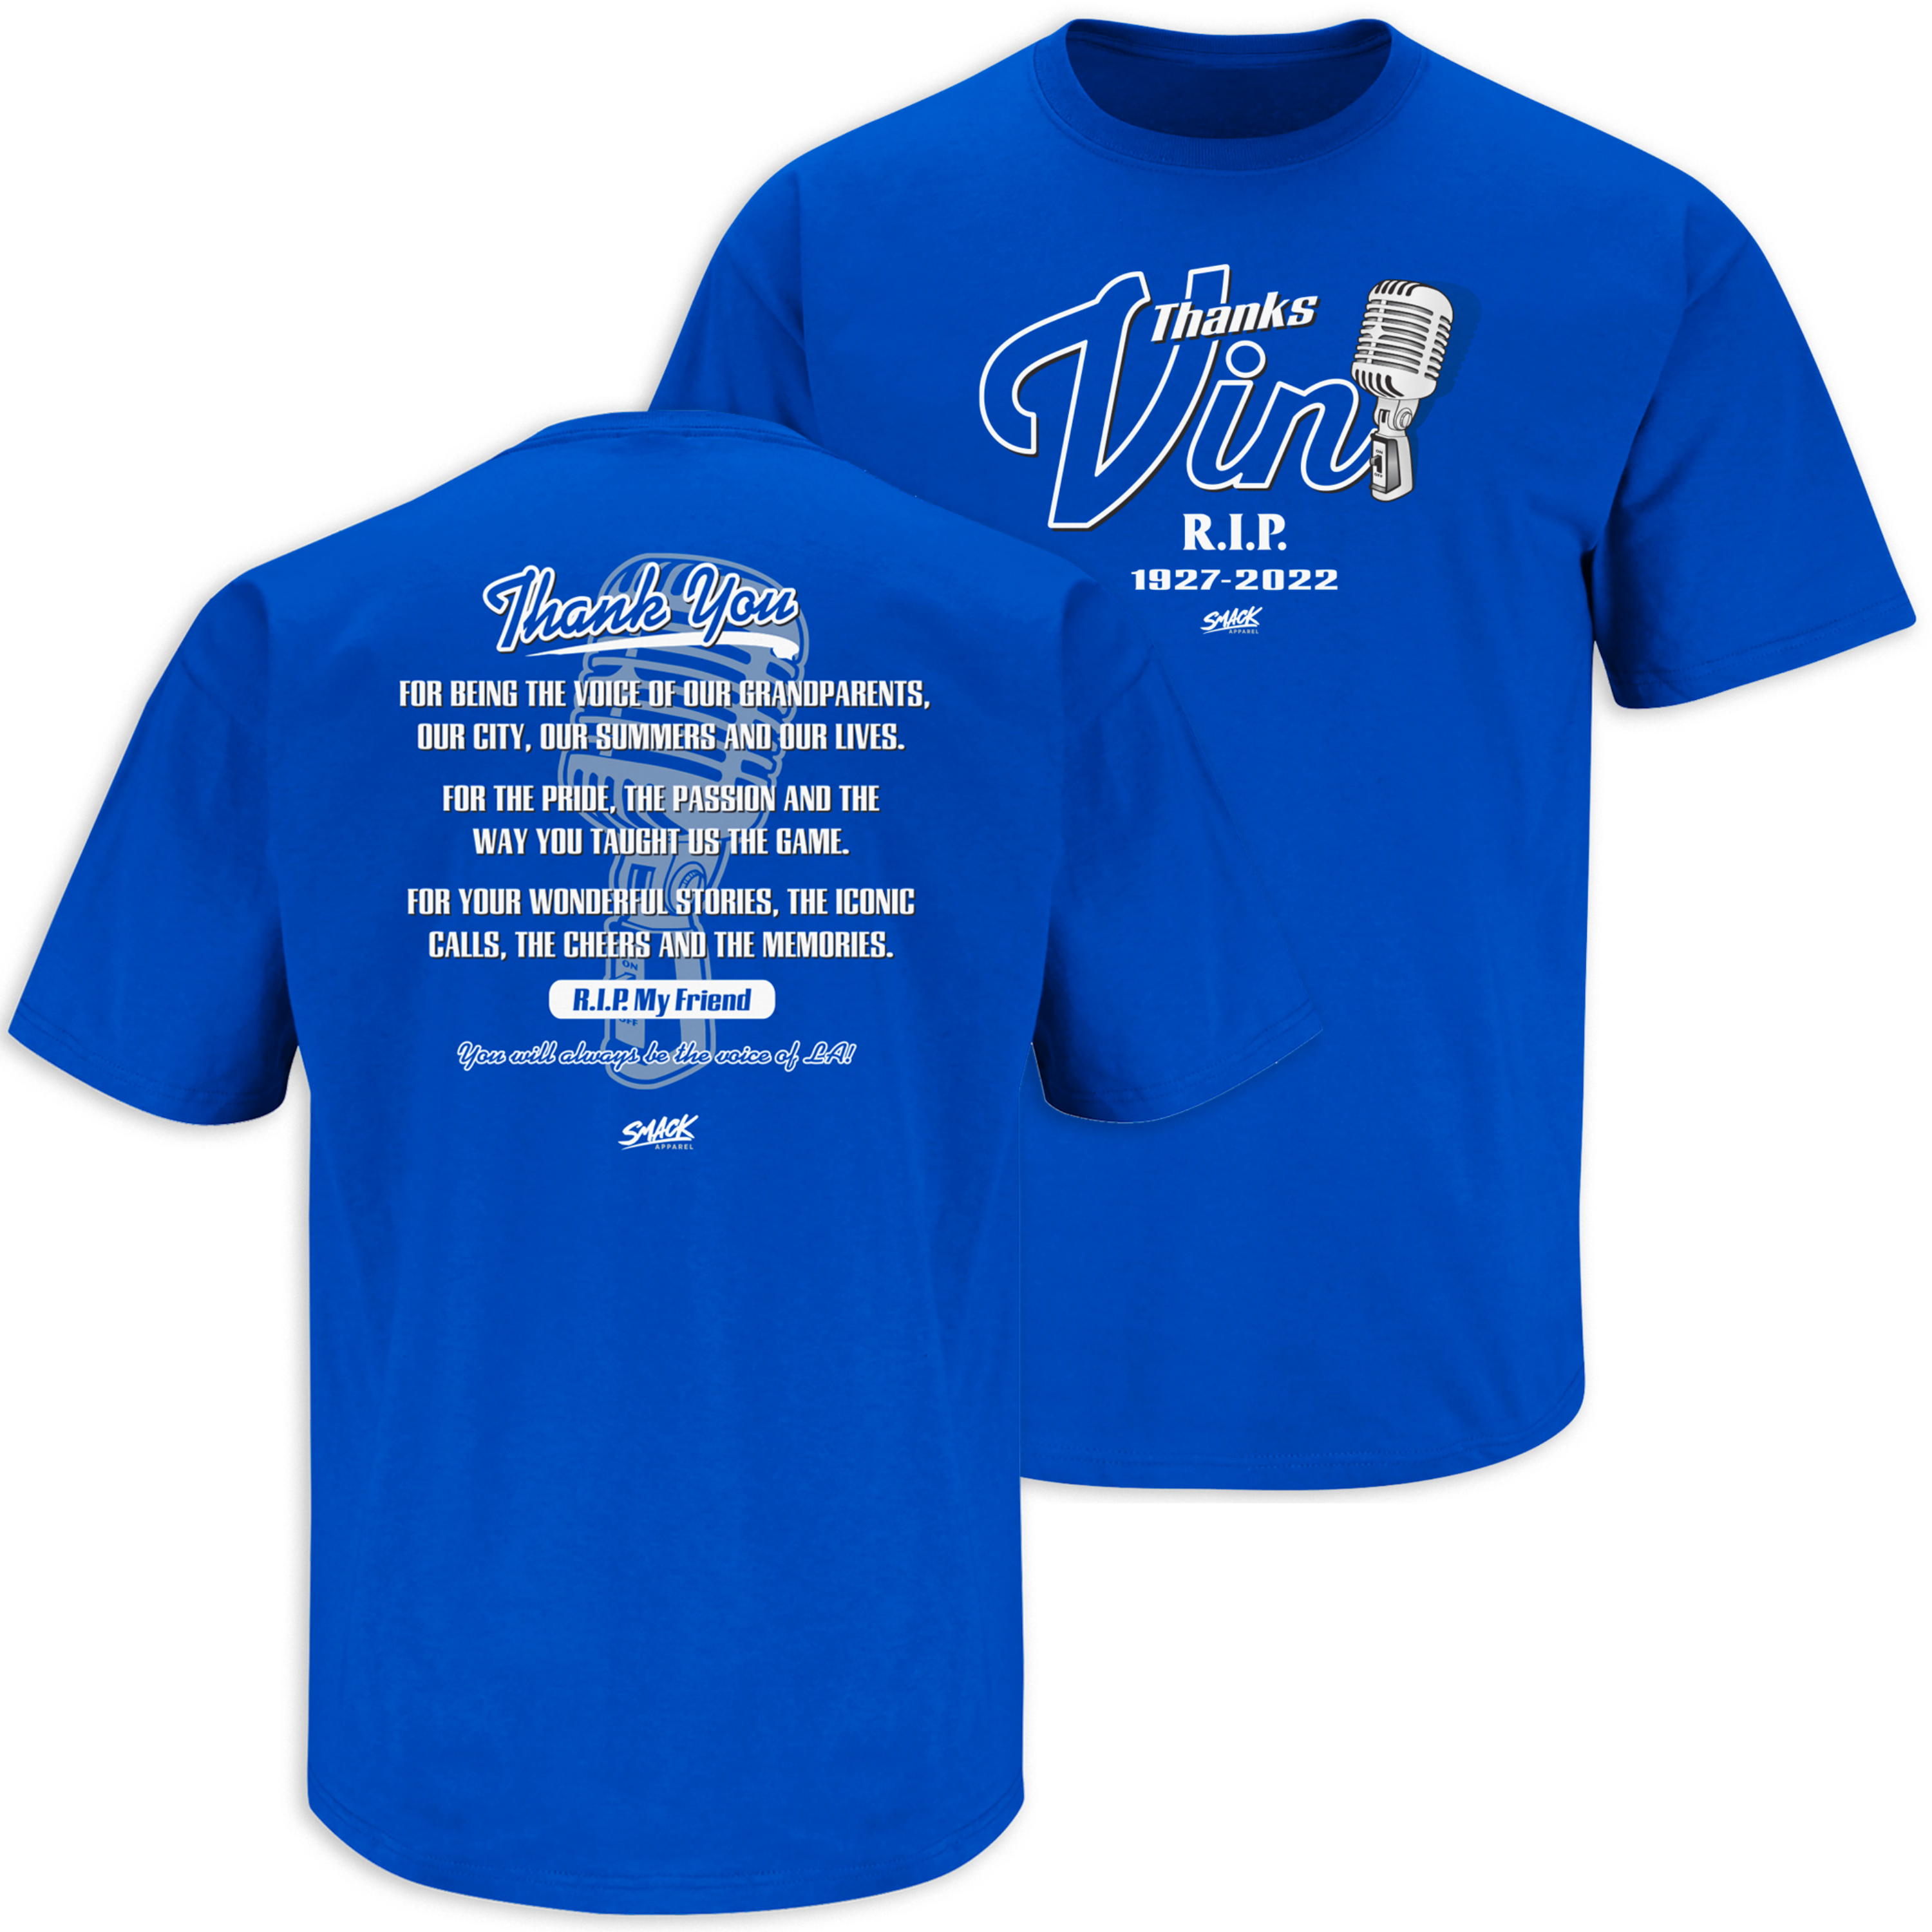 Vin Scully T Shirt - Teeholly